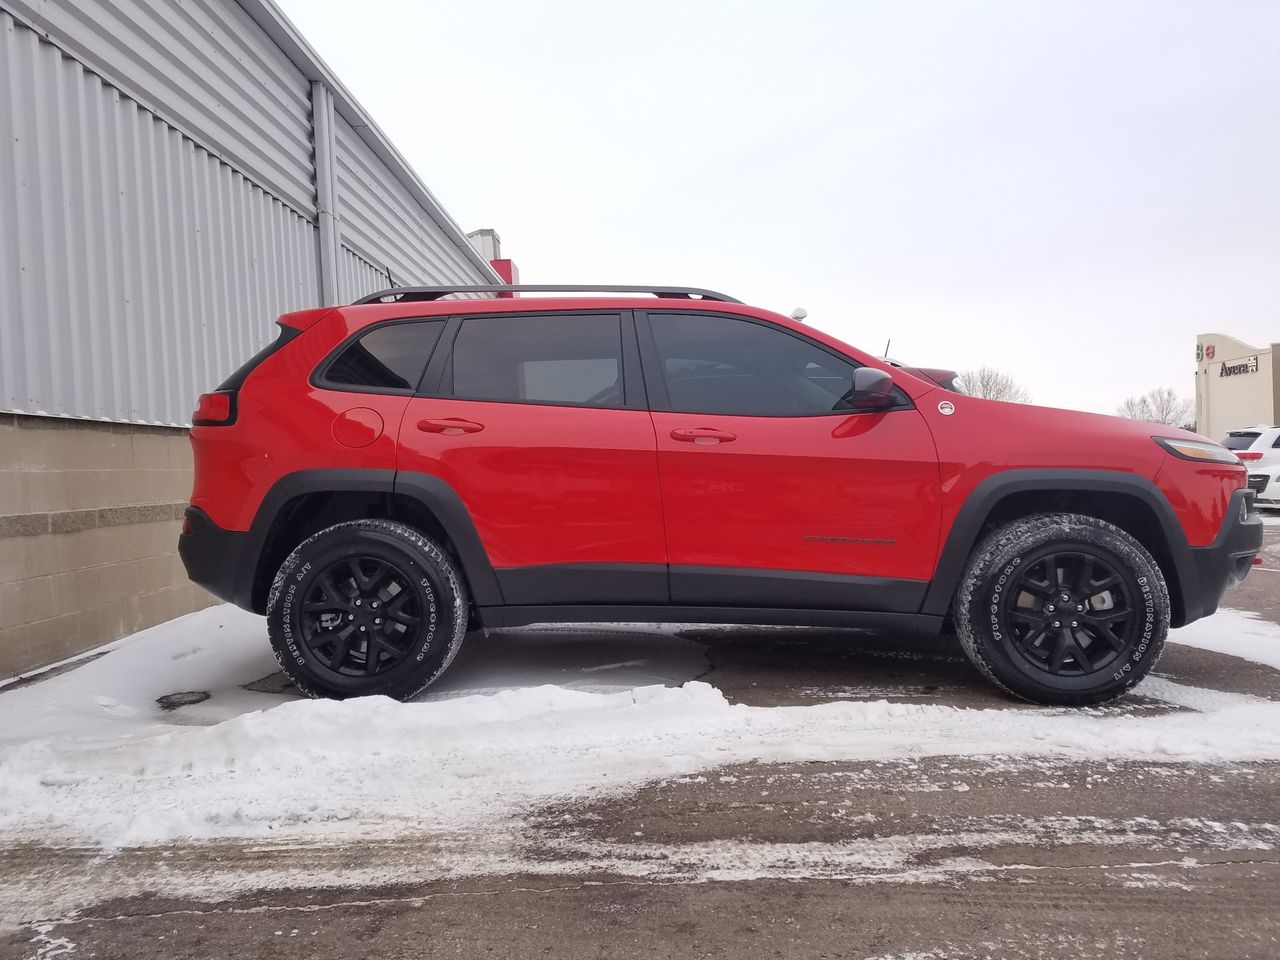 2018 Jeep Cherokee Trailhawk | Sioux Falls, SD, Firecracker Red Clear Coat (Red & Orange), 4x4